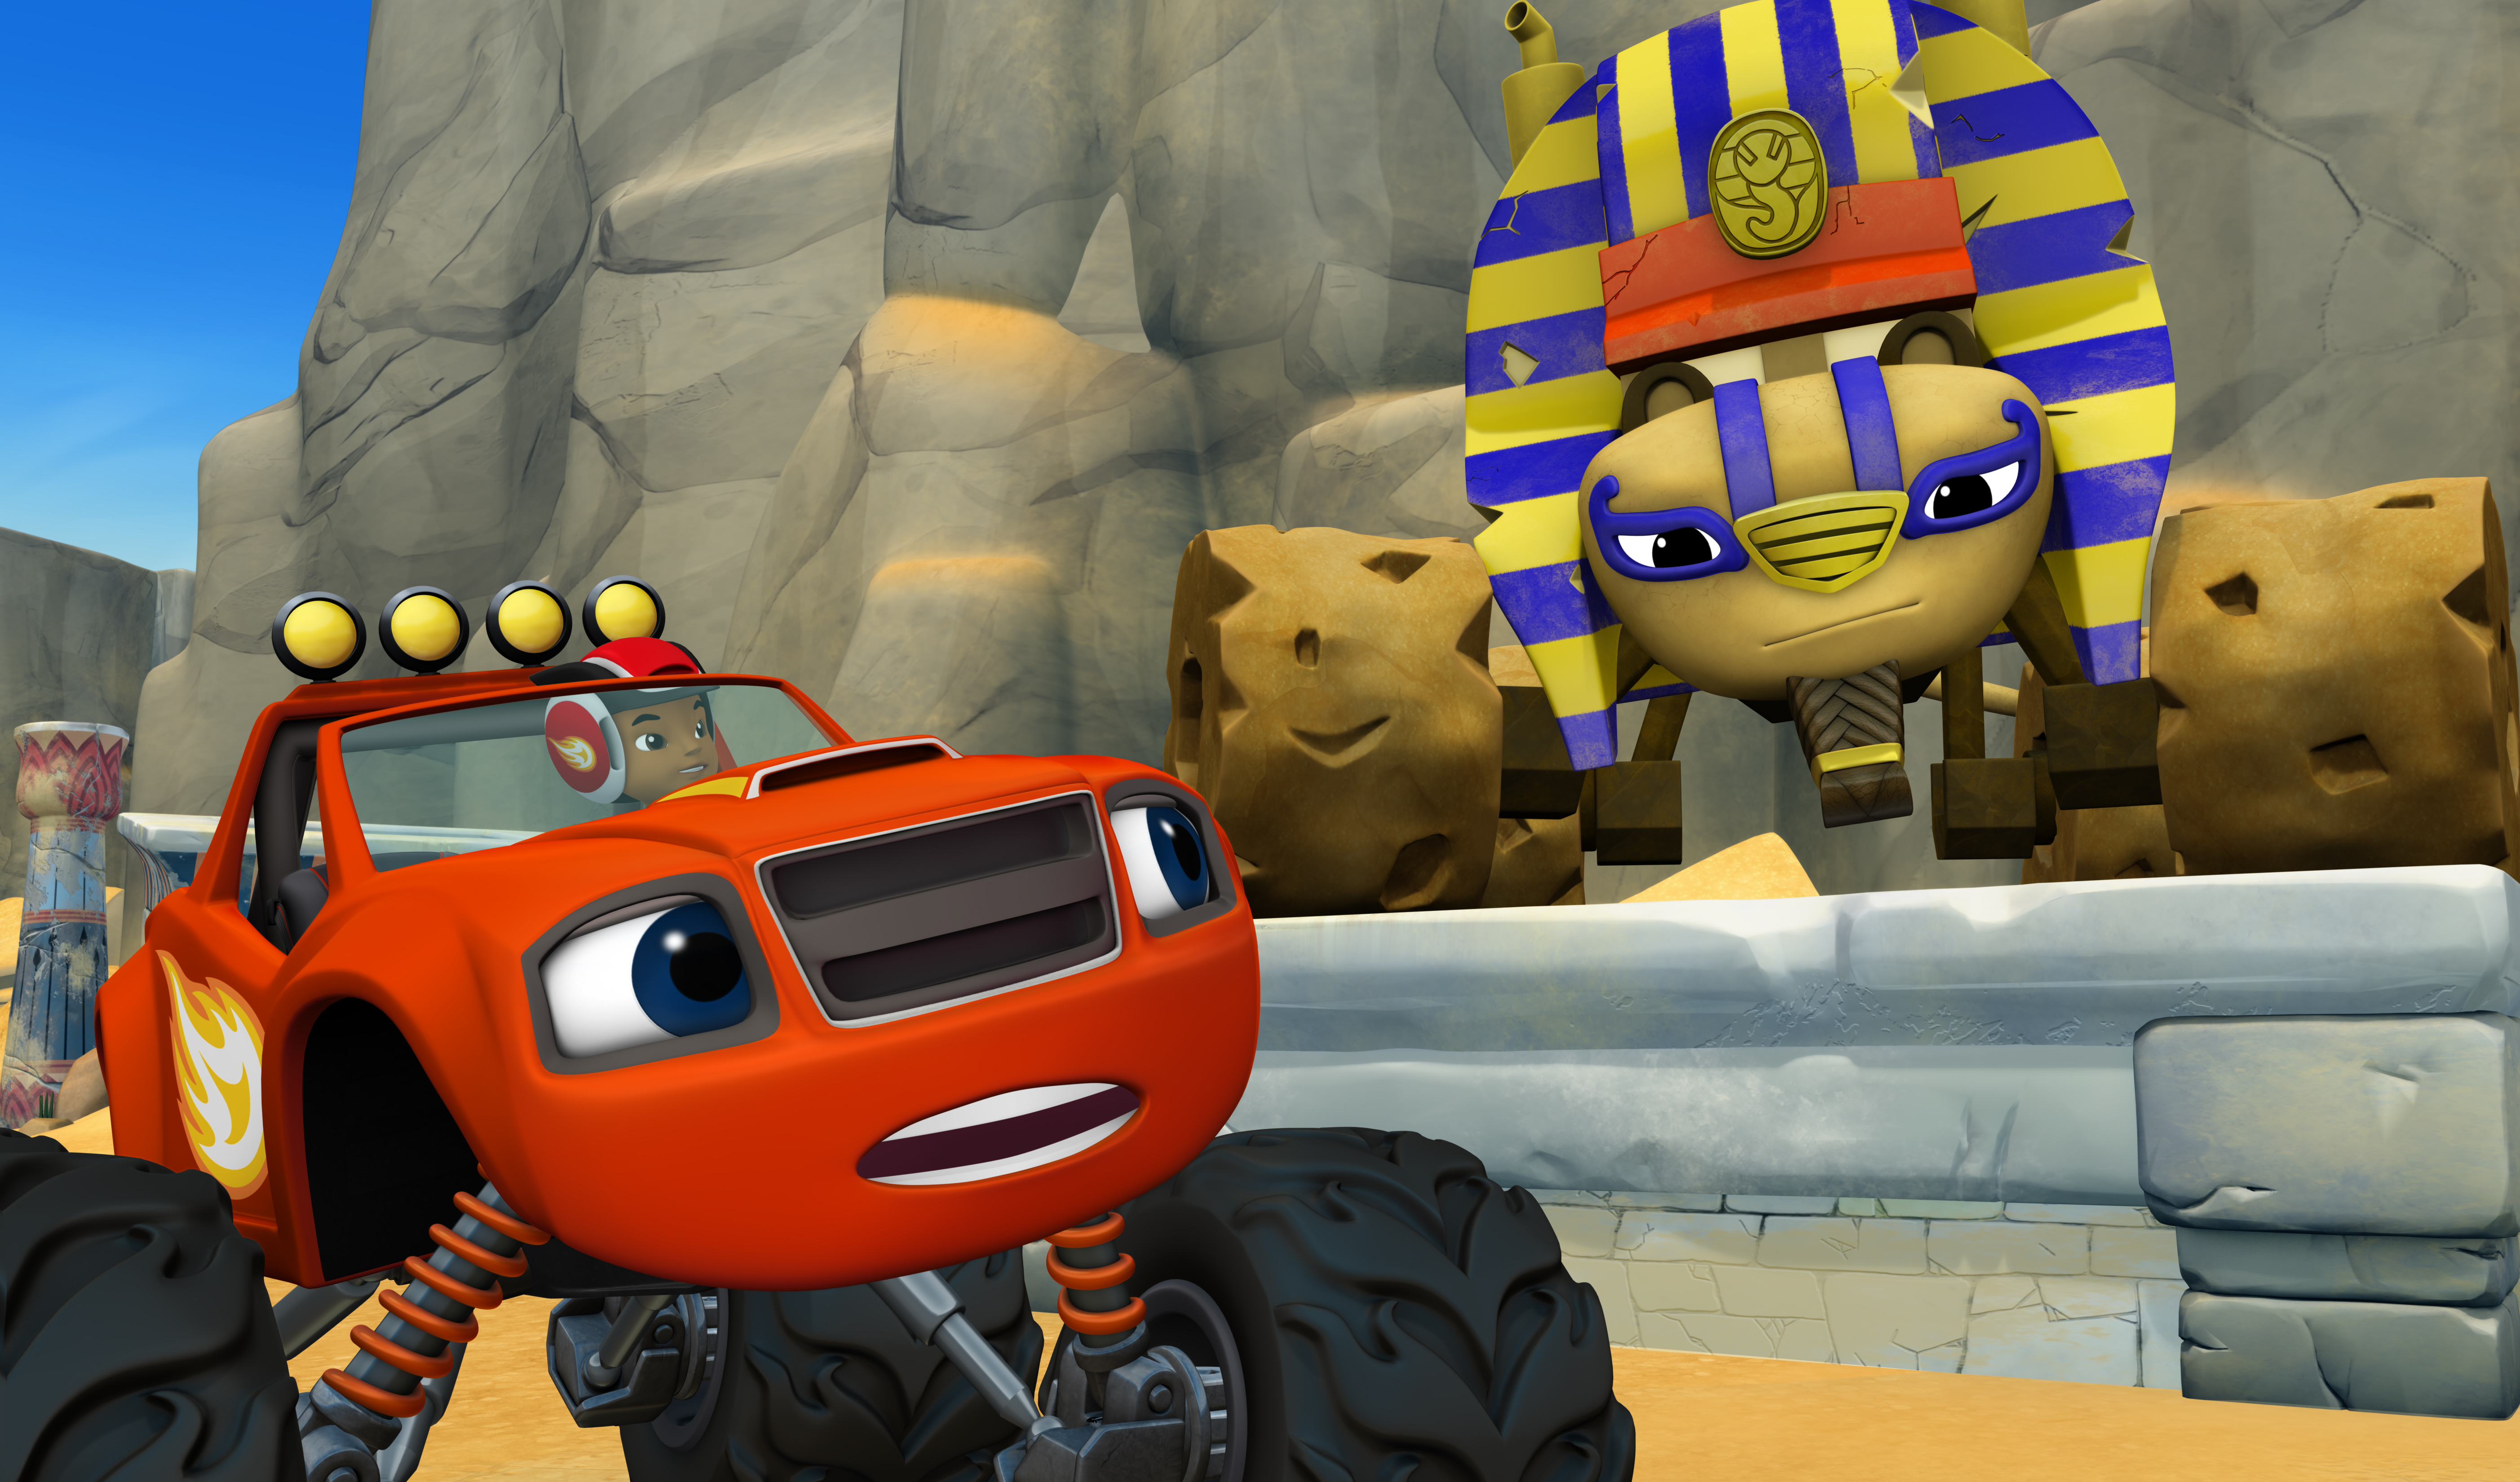 Nickelodeon Presents Epic Blaze and the Monster Machines Prime